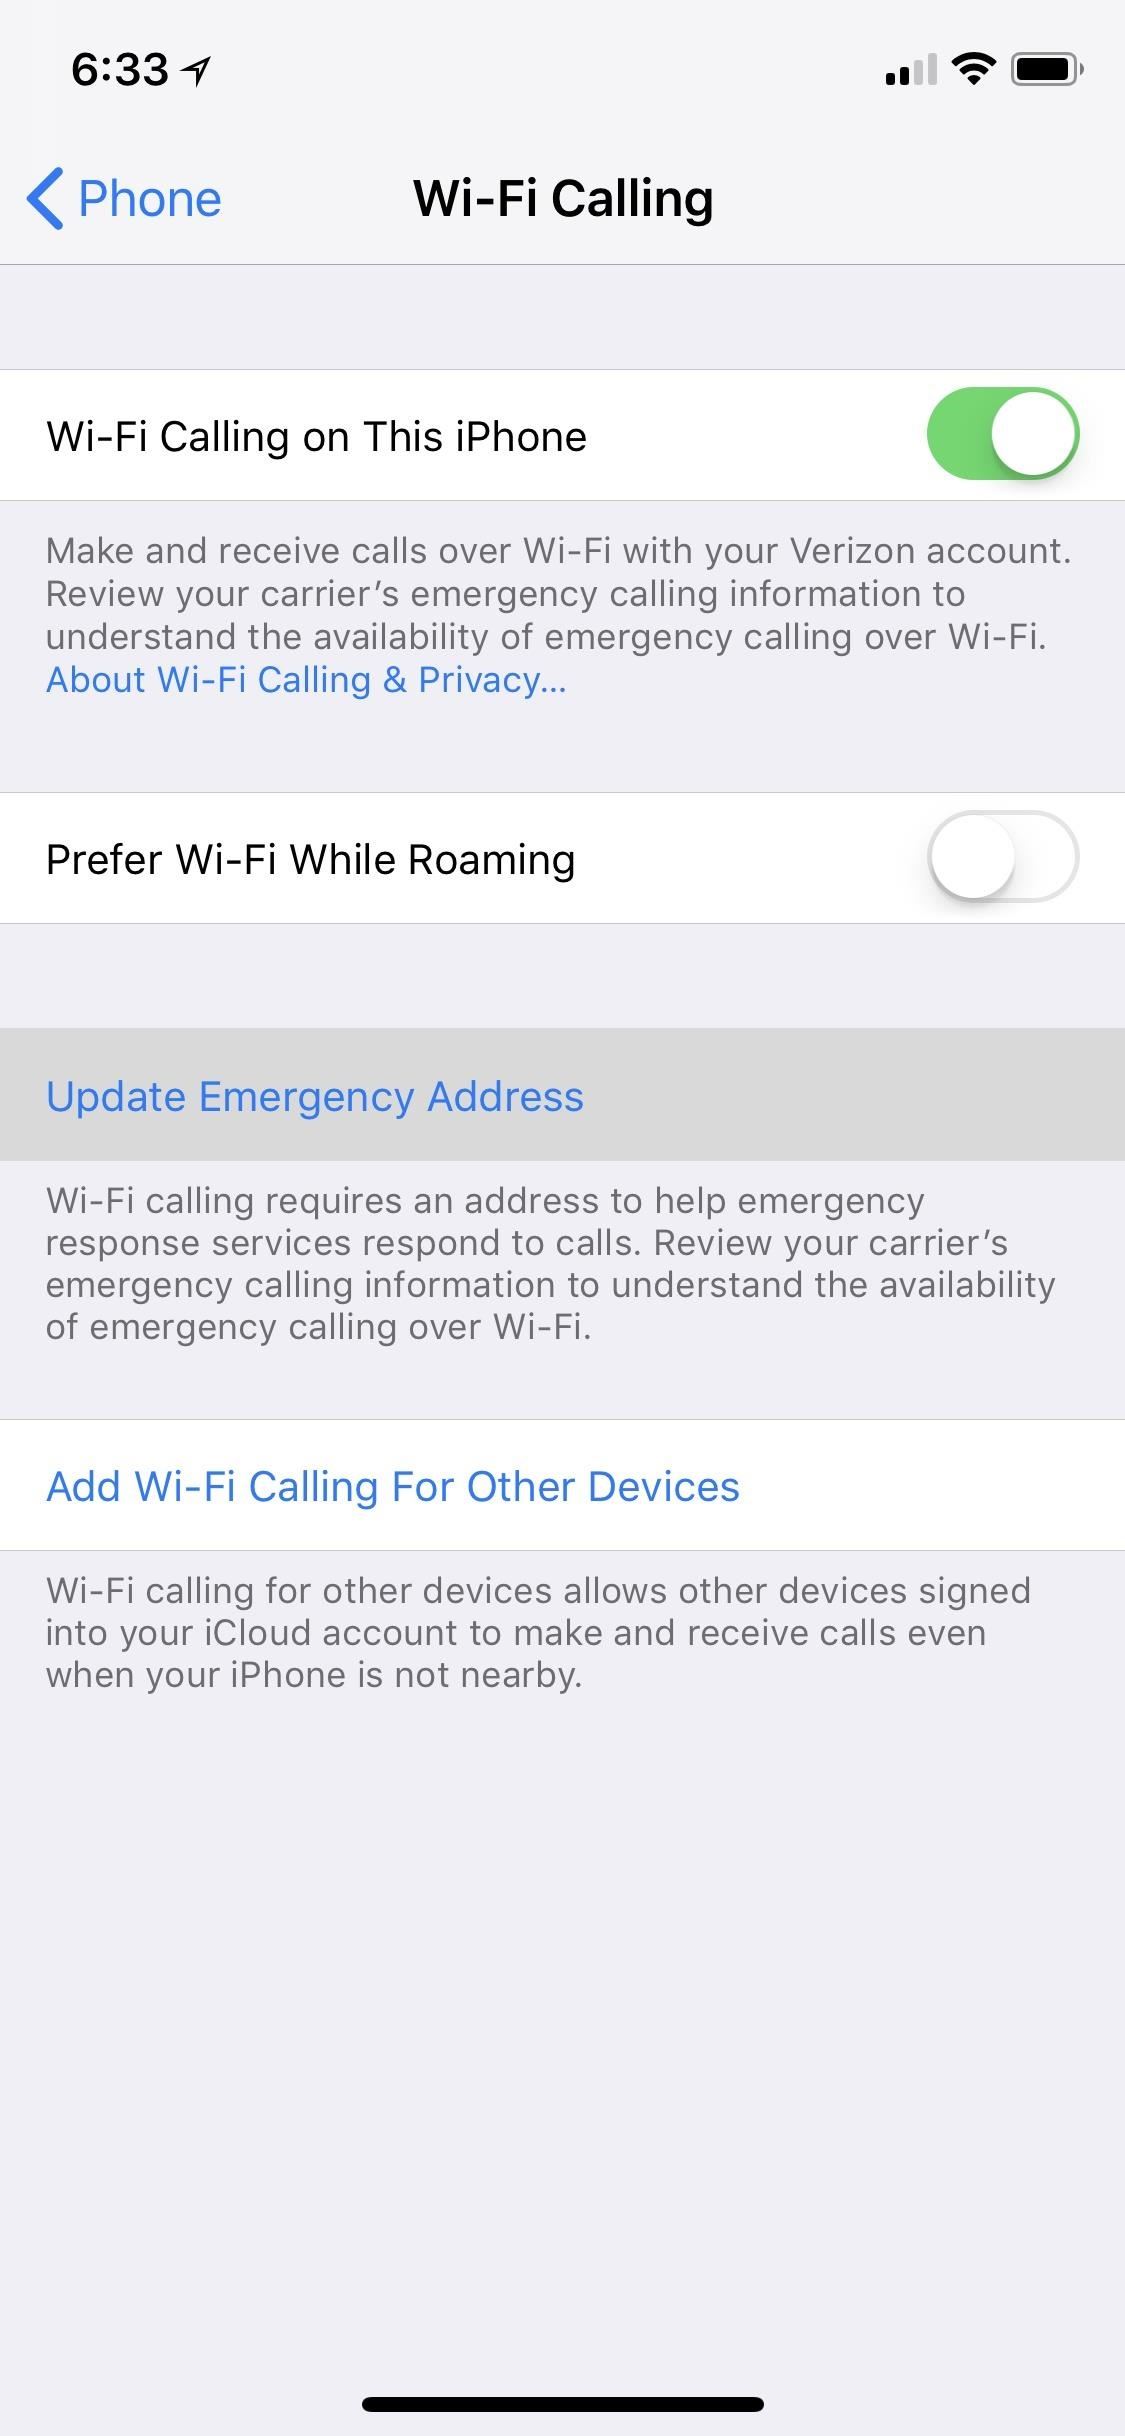 How to Call 911 from Your Apple Watch in Case of an Emergency